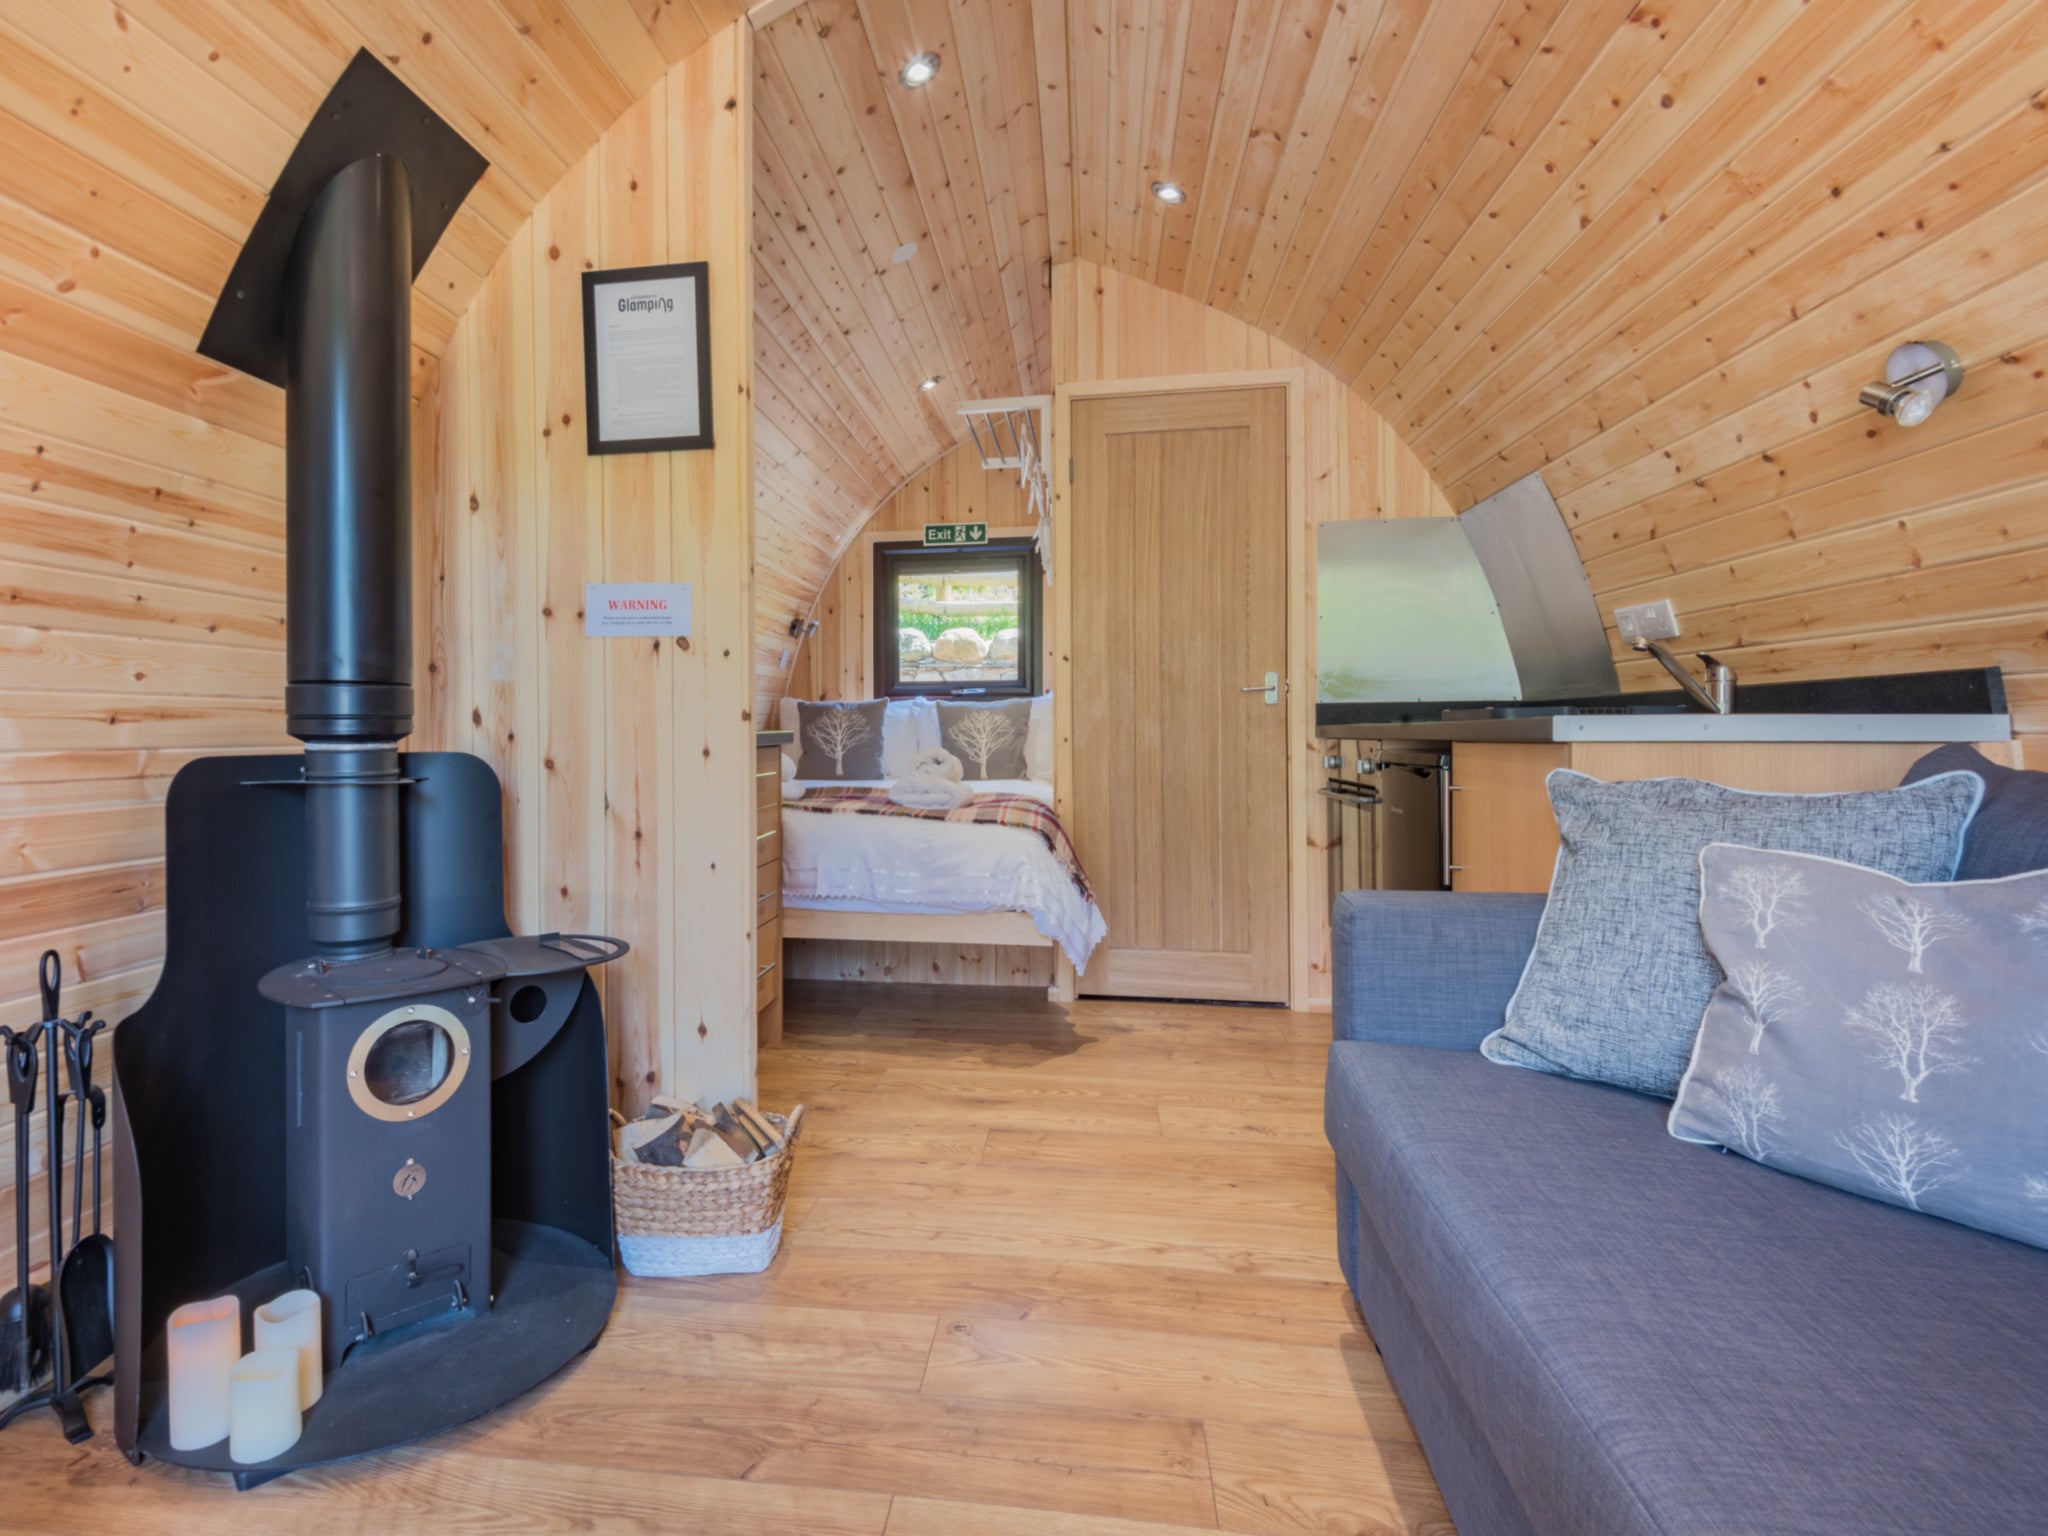 The pods feature wood-burning stoves, shower rooms and terraces